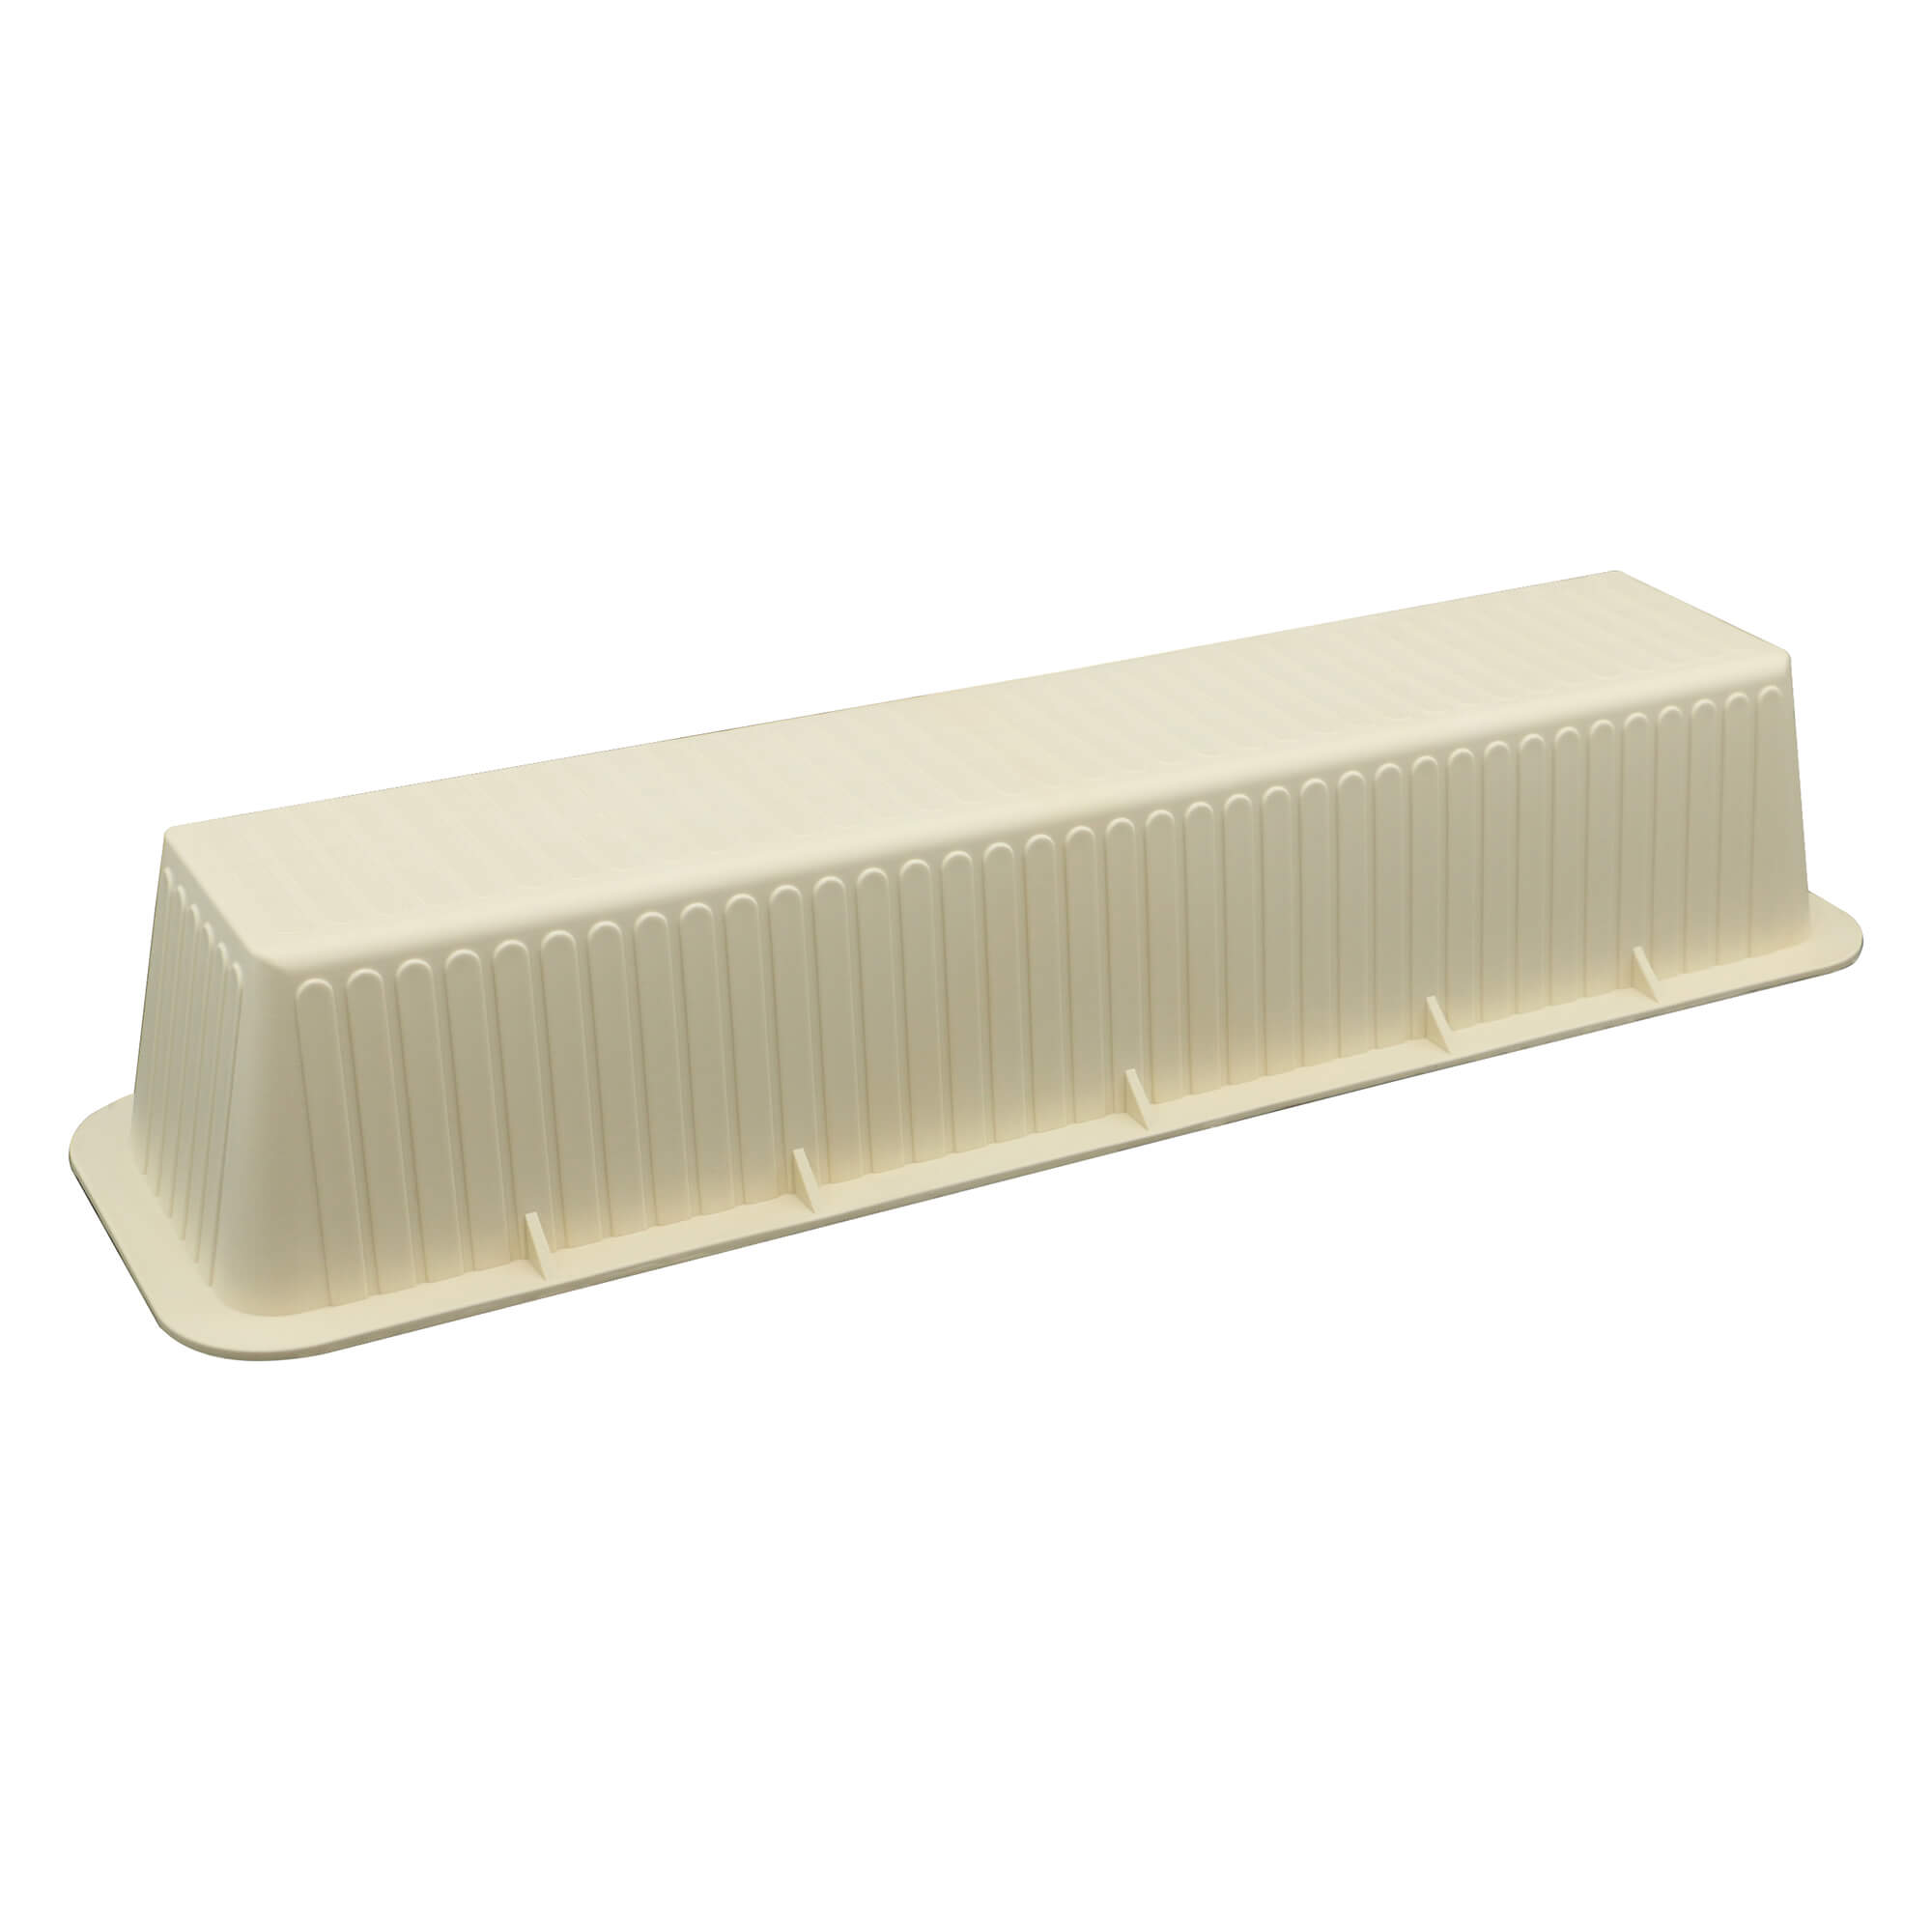 450 mm Mounting Block (Pack of 2)